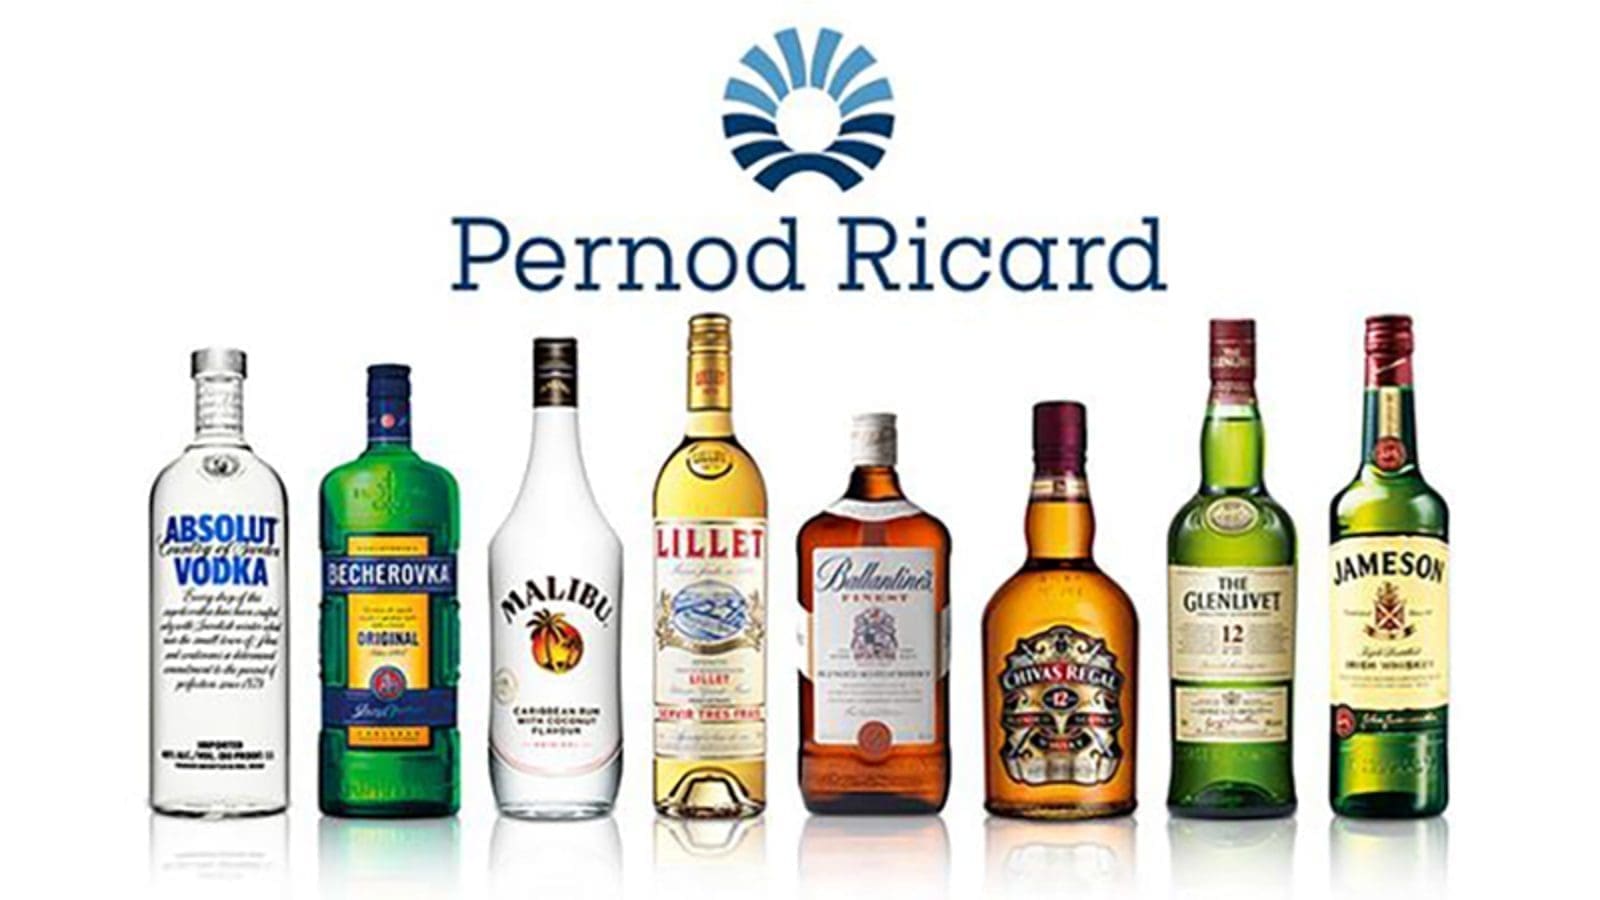 Pernod Ricard announces big CAPEX plans to protect future growth